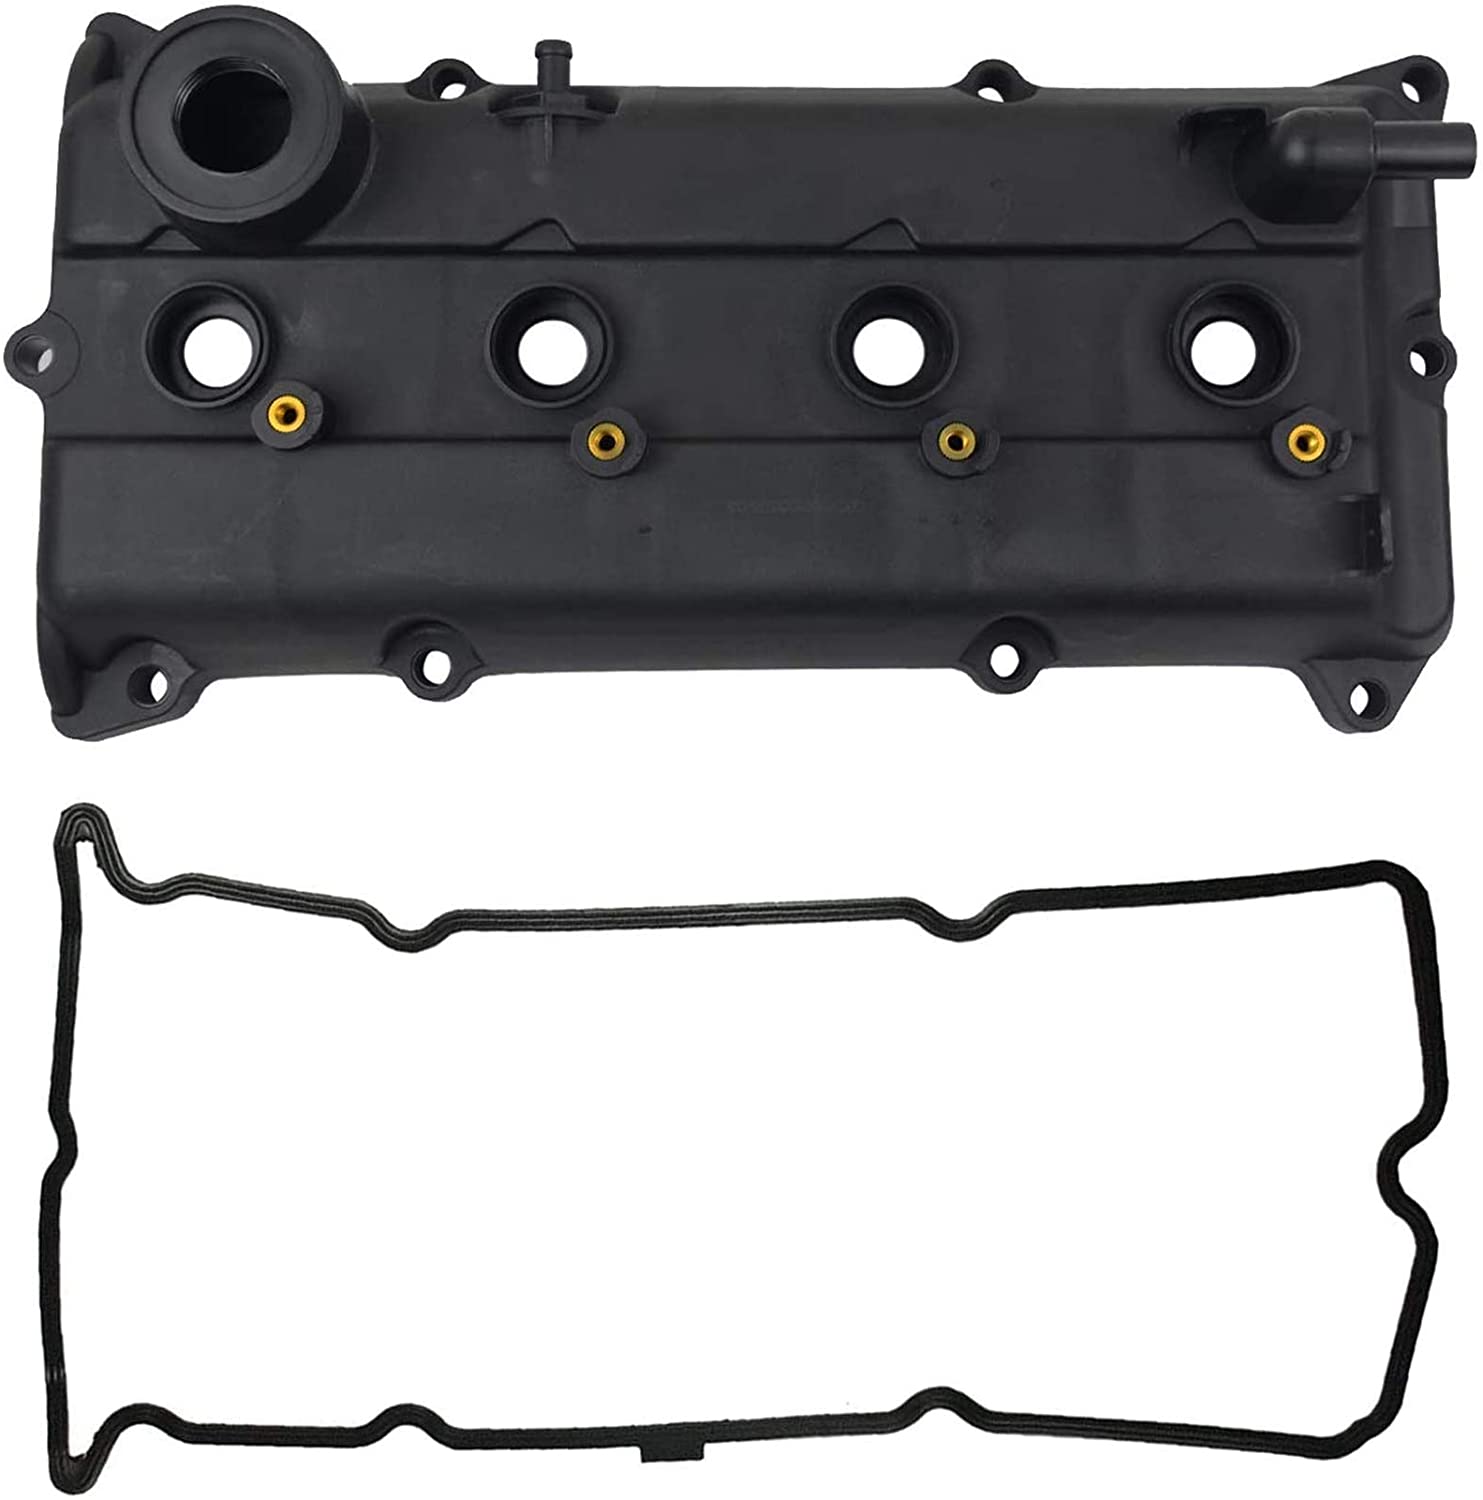 Benefast 13264-3Z001 Engine Valve Cover Kit With Preinstalled Gasket Spark Plug Tube Seals Compatible with Altima Sentra 2002-2006 Replacement# 264-982 13270-3Z000 CNVG-D1252VC